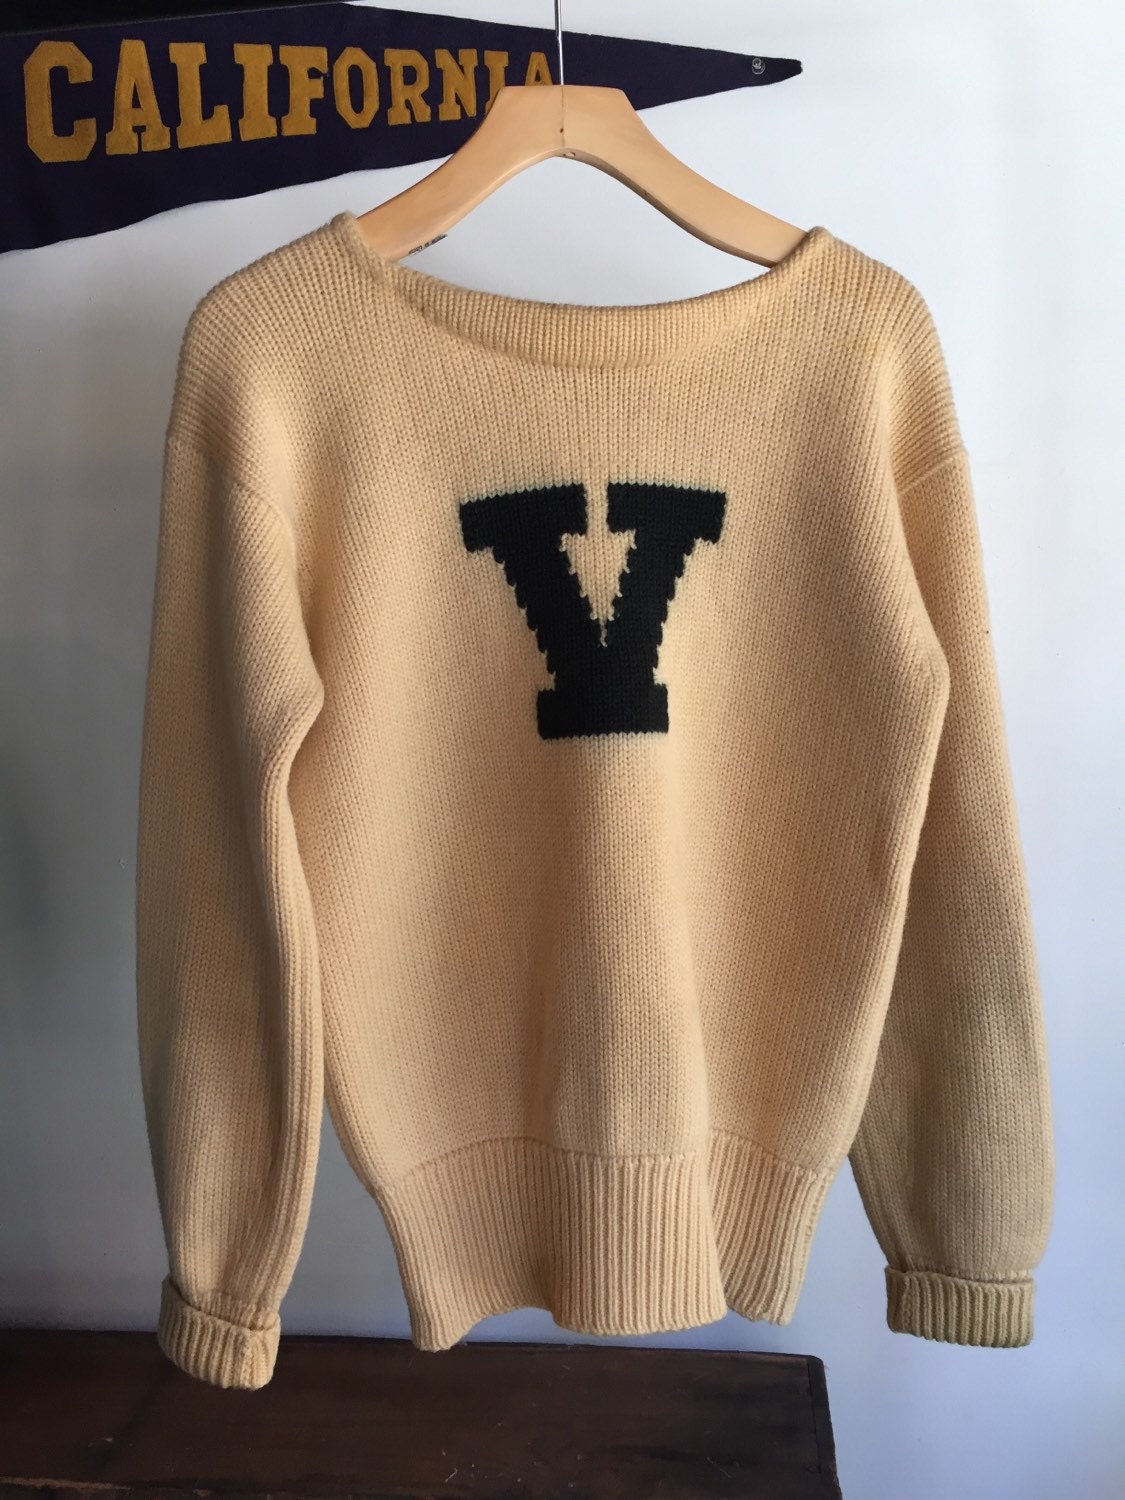 Vintage 40s Varsity Yale sweater by RaggedyThreads on Etsy